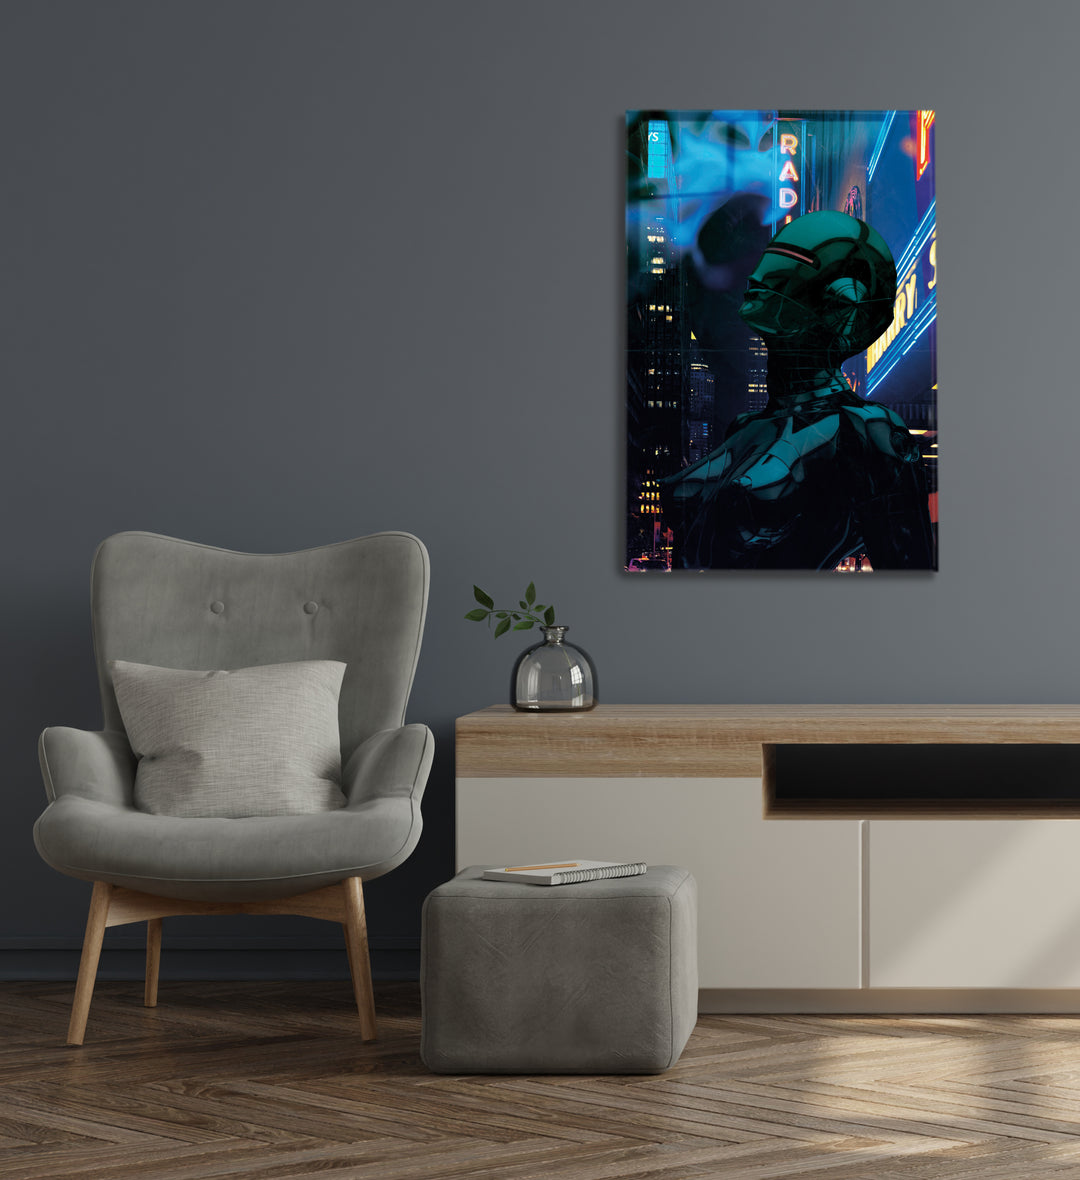 Acrylic Modern Wall Art Robotic City - Acrylic Wall Art - Picture Photo Printing Artwork - Multiple Size Options - egraphicstore